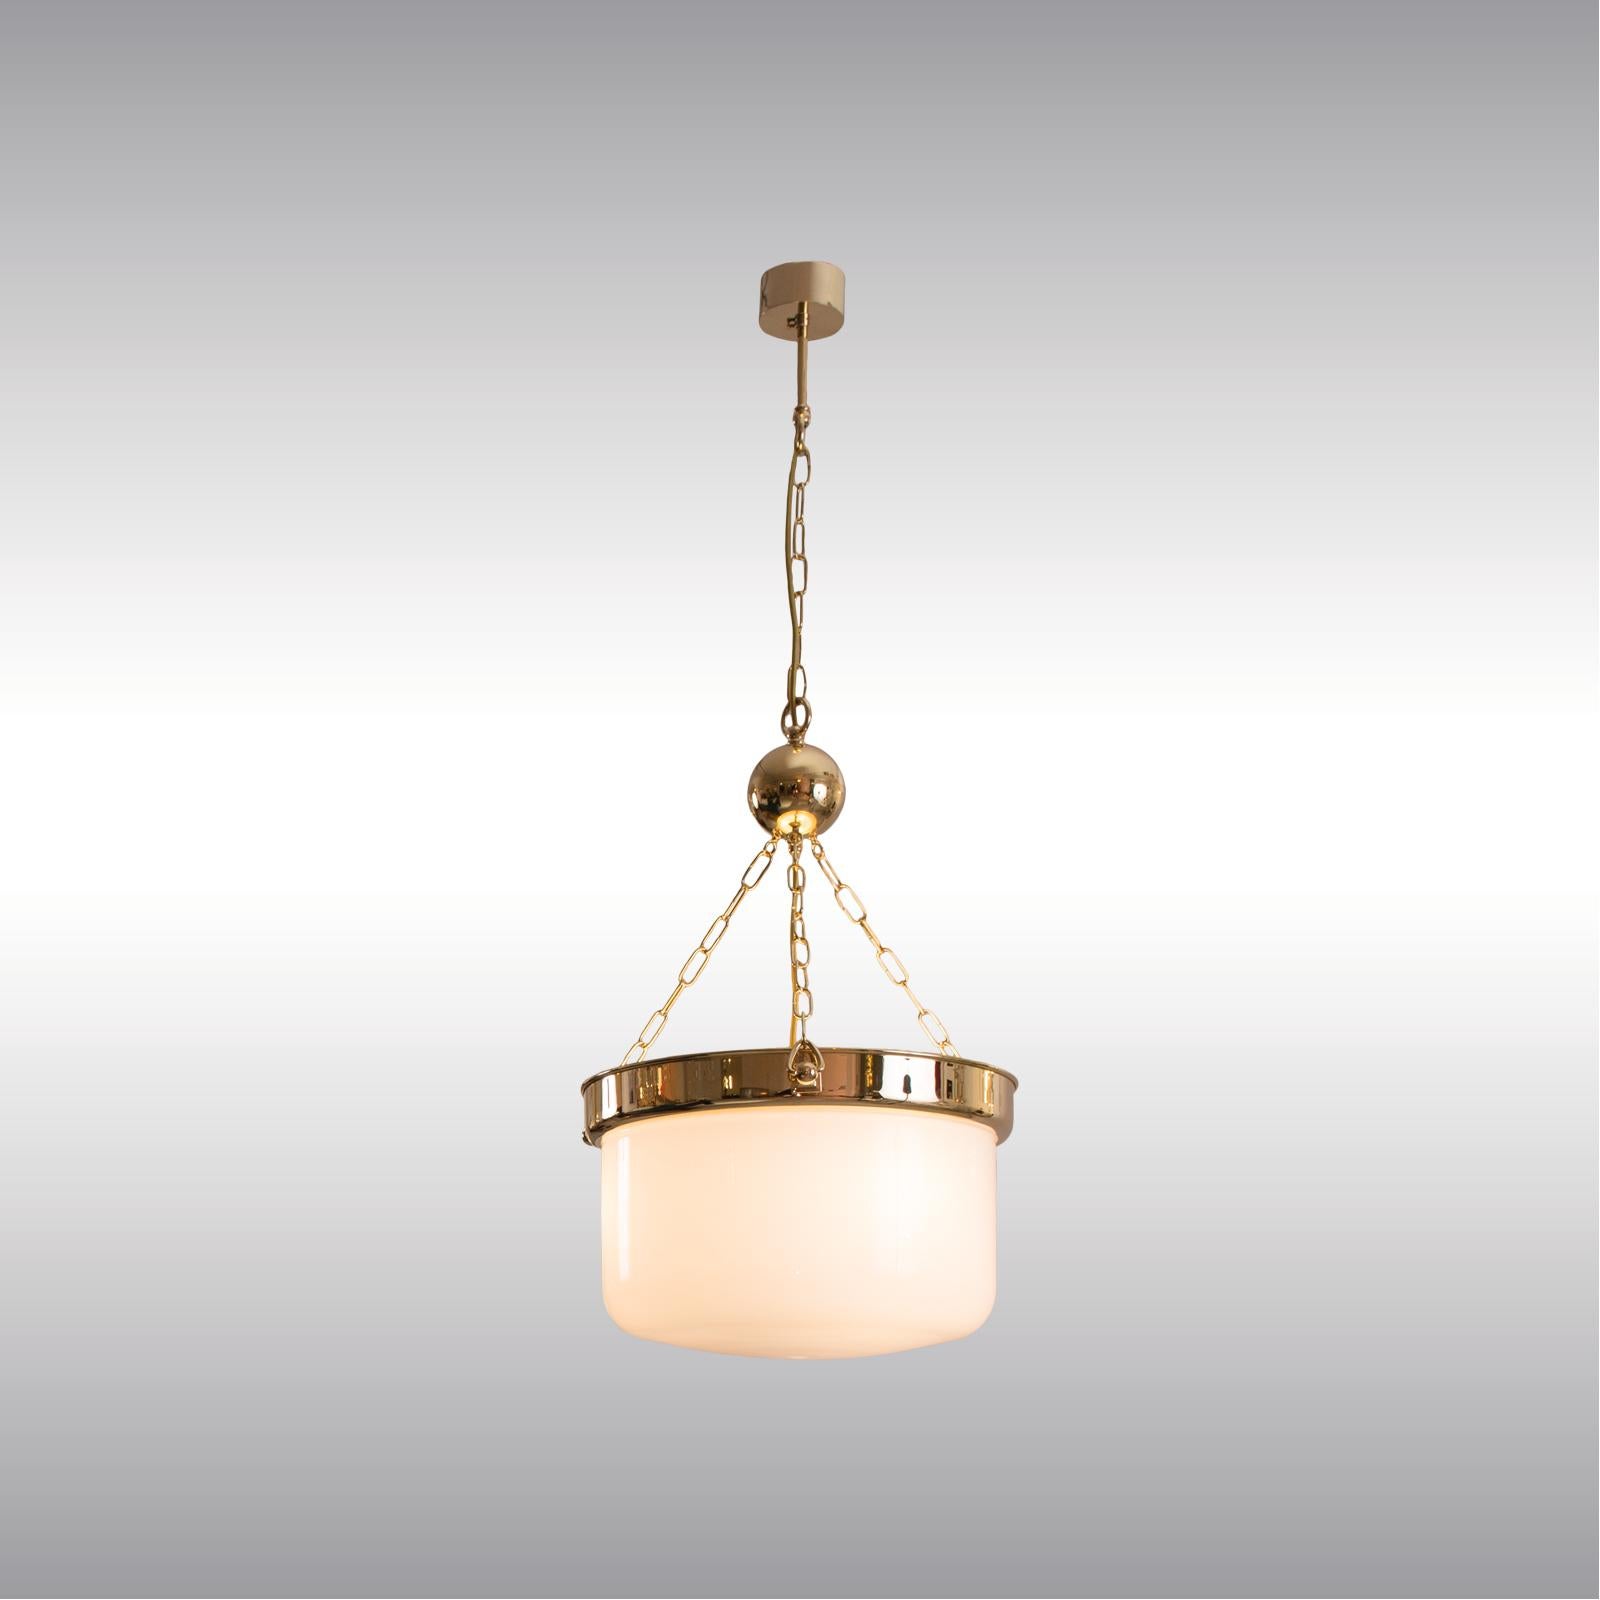 Hand-Crafted Adolf Loos Jugendstil Ceiling Lamp from the Looshaus in Vienna, Re-Edition For Sale